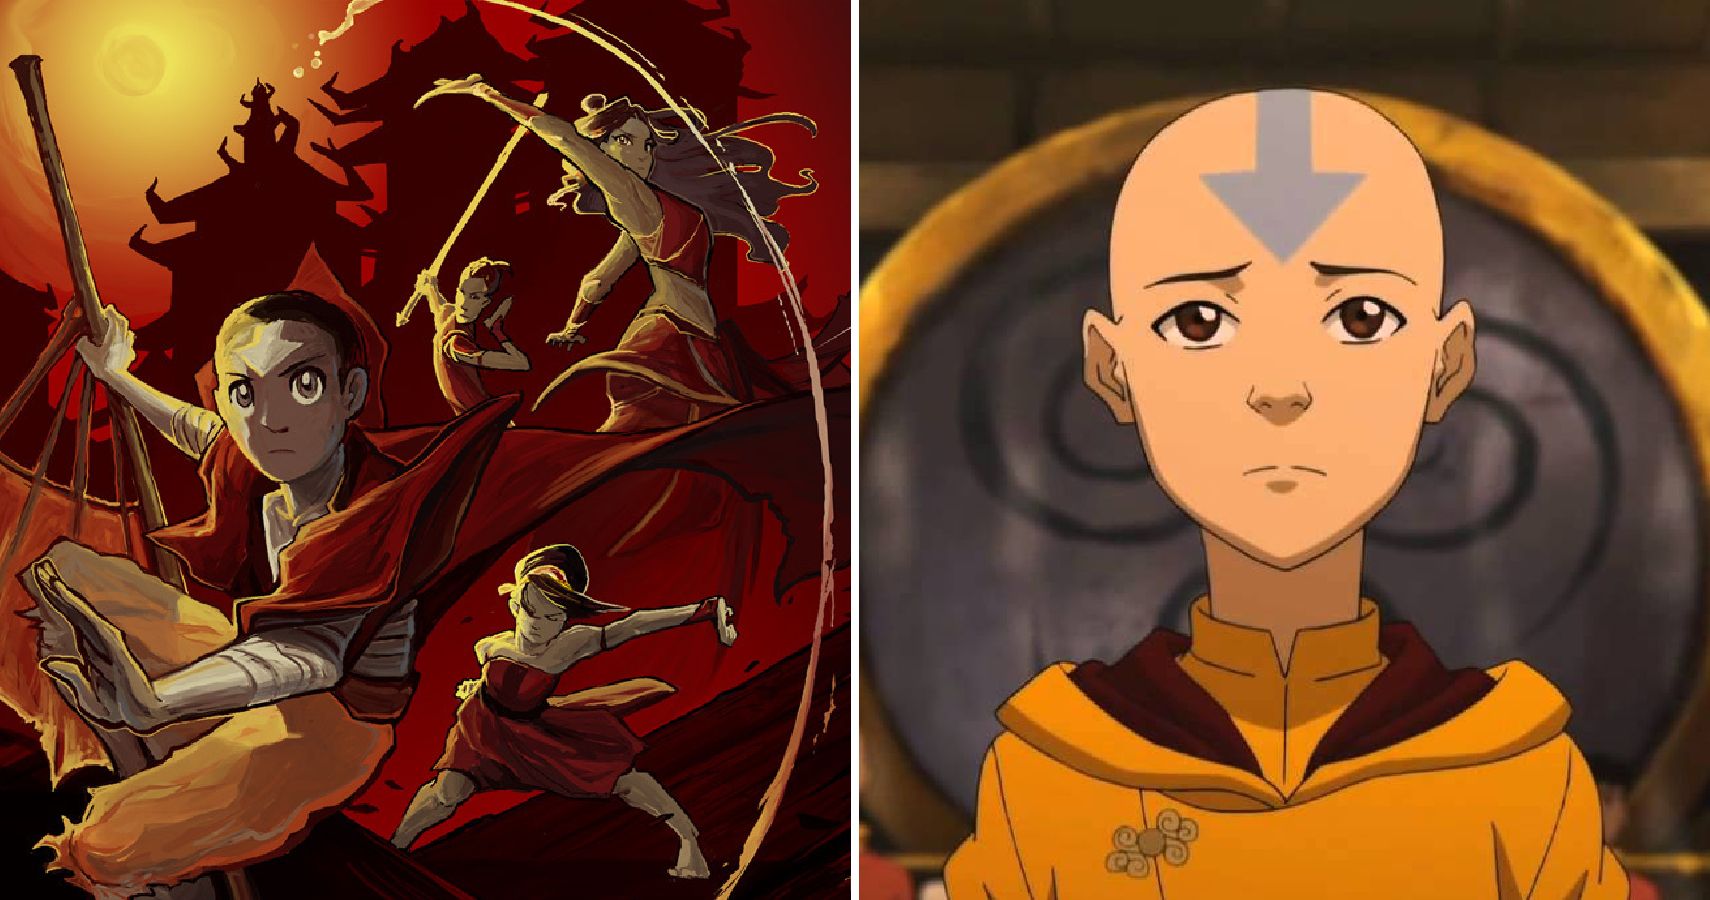 22 Ridiculous Things That Happened Between Book 2 And 3 In Avatar The Last Airbender